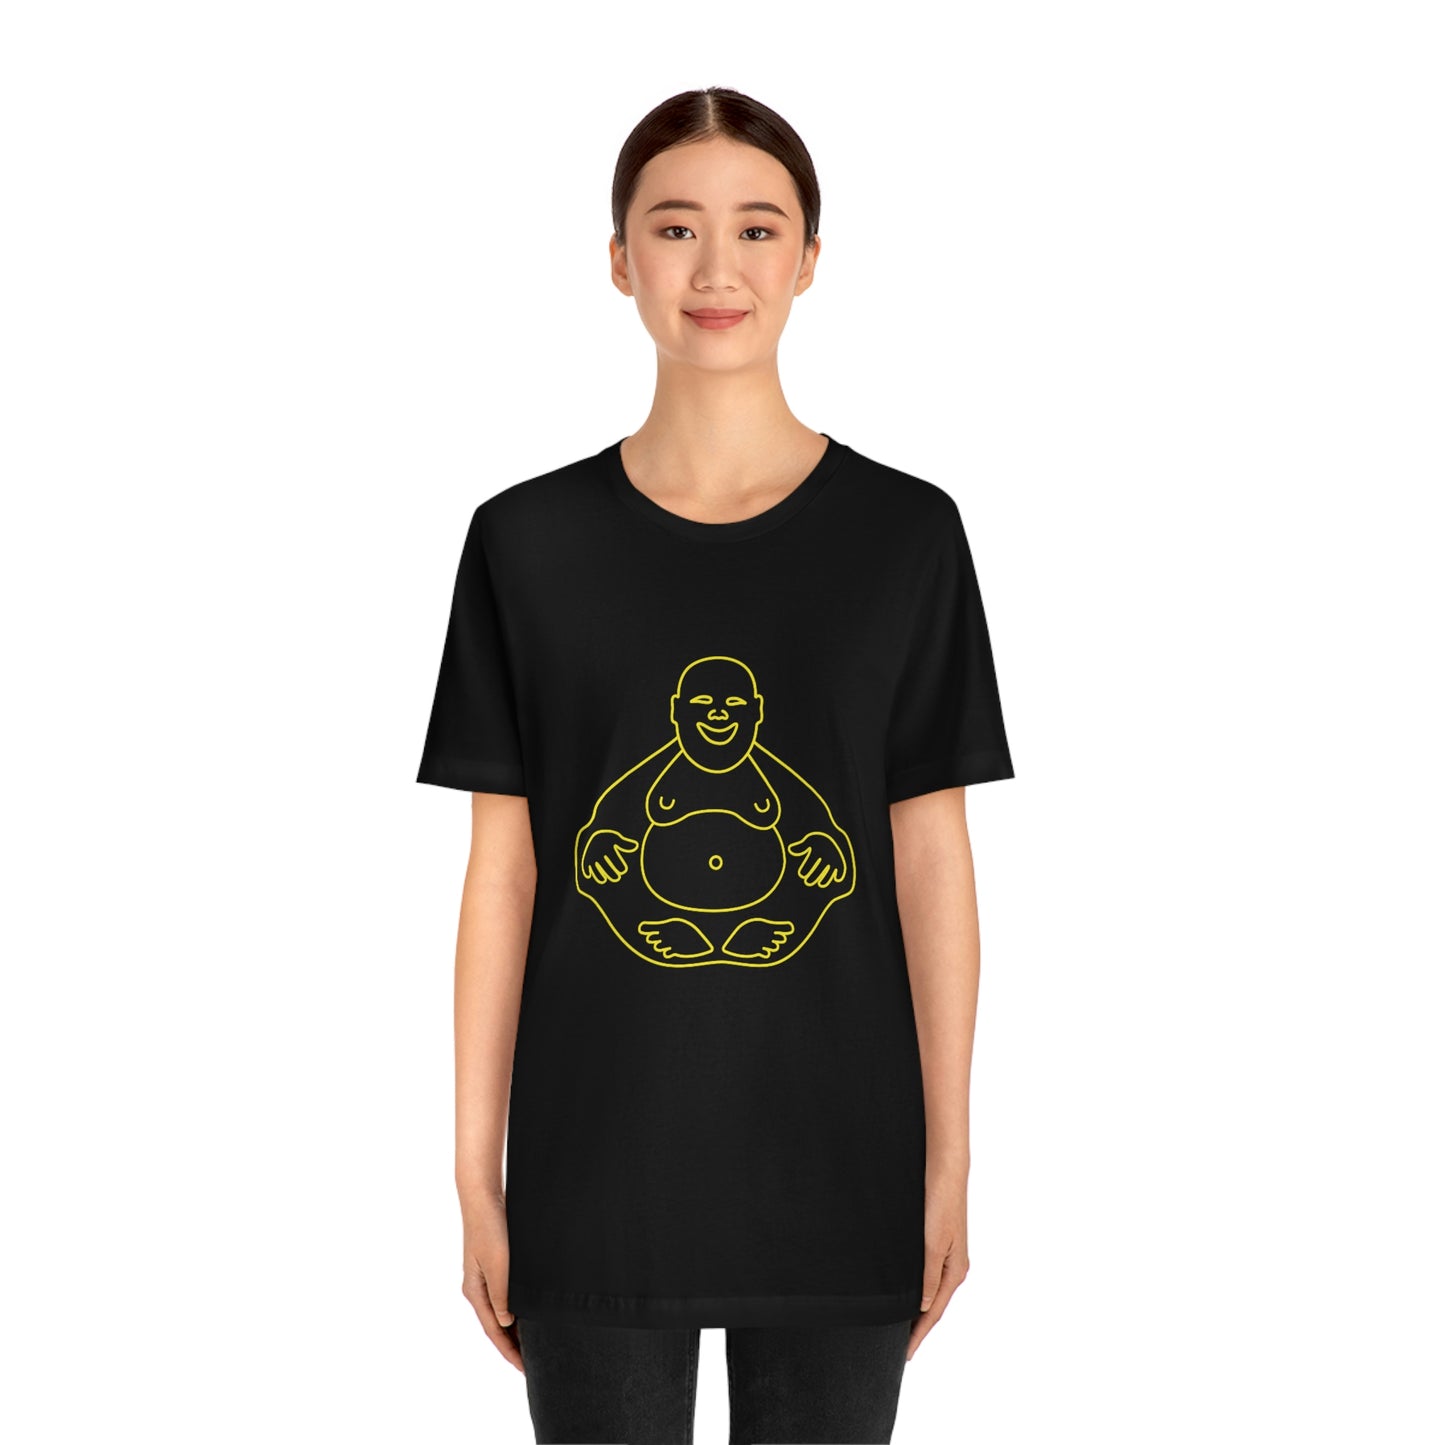 Black T-Shirt featuring a yellow 'Laughing Buddha' design from the TEQNEON Ha Ha Land collection, exuding joy and humour